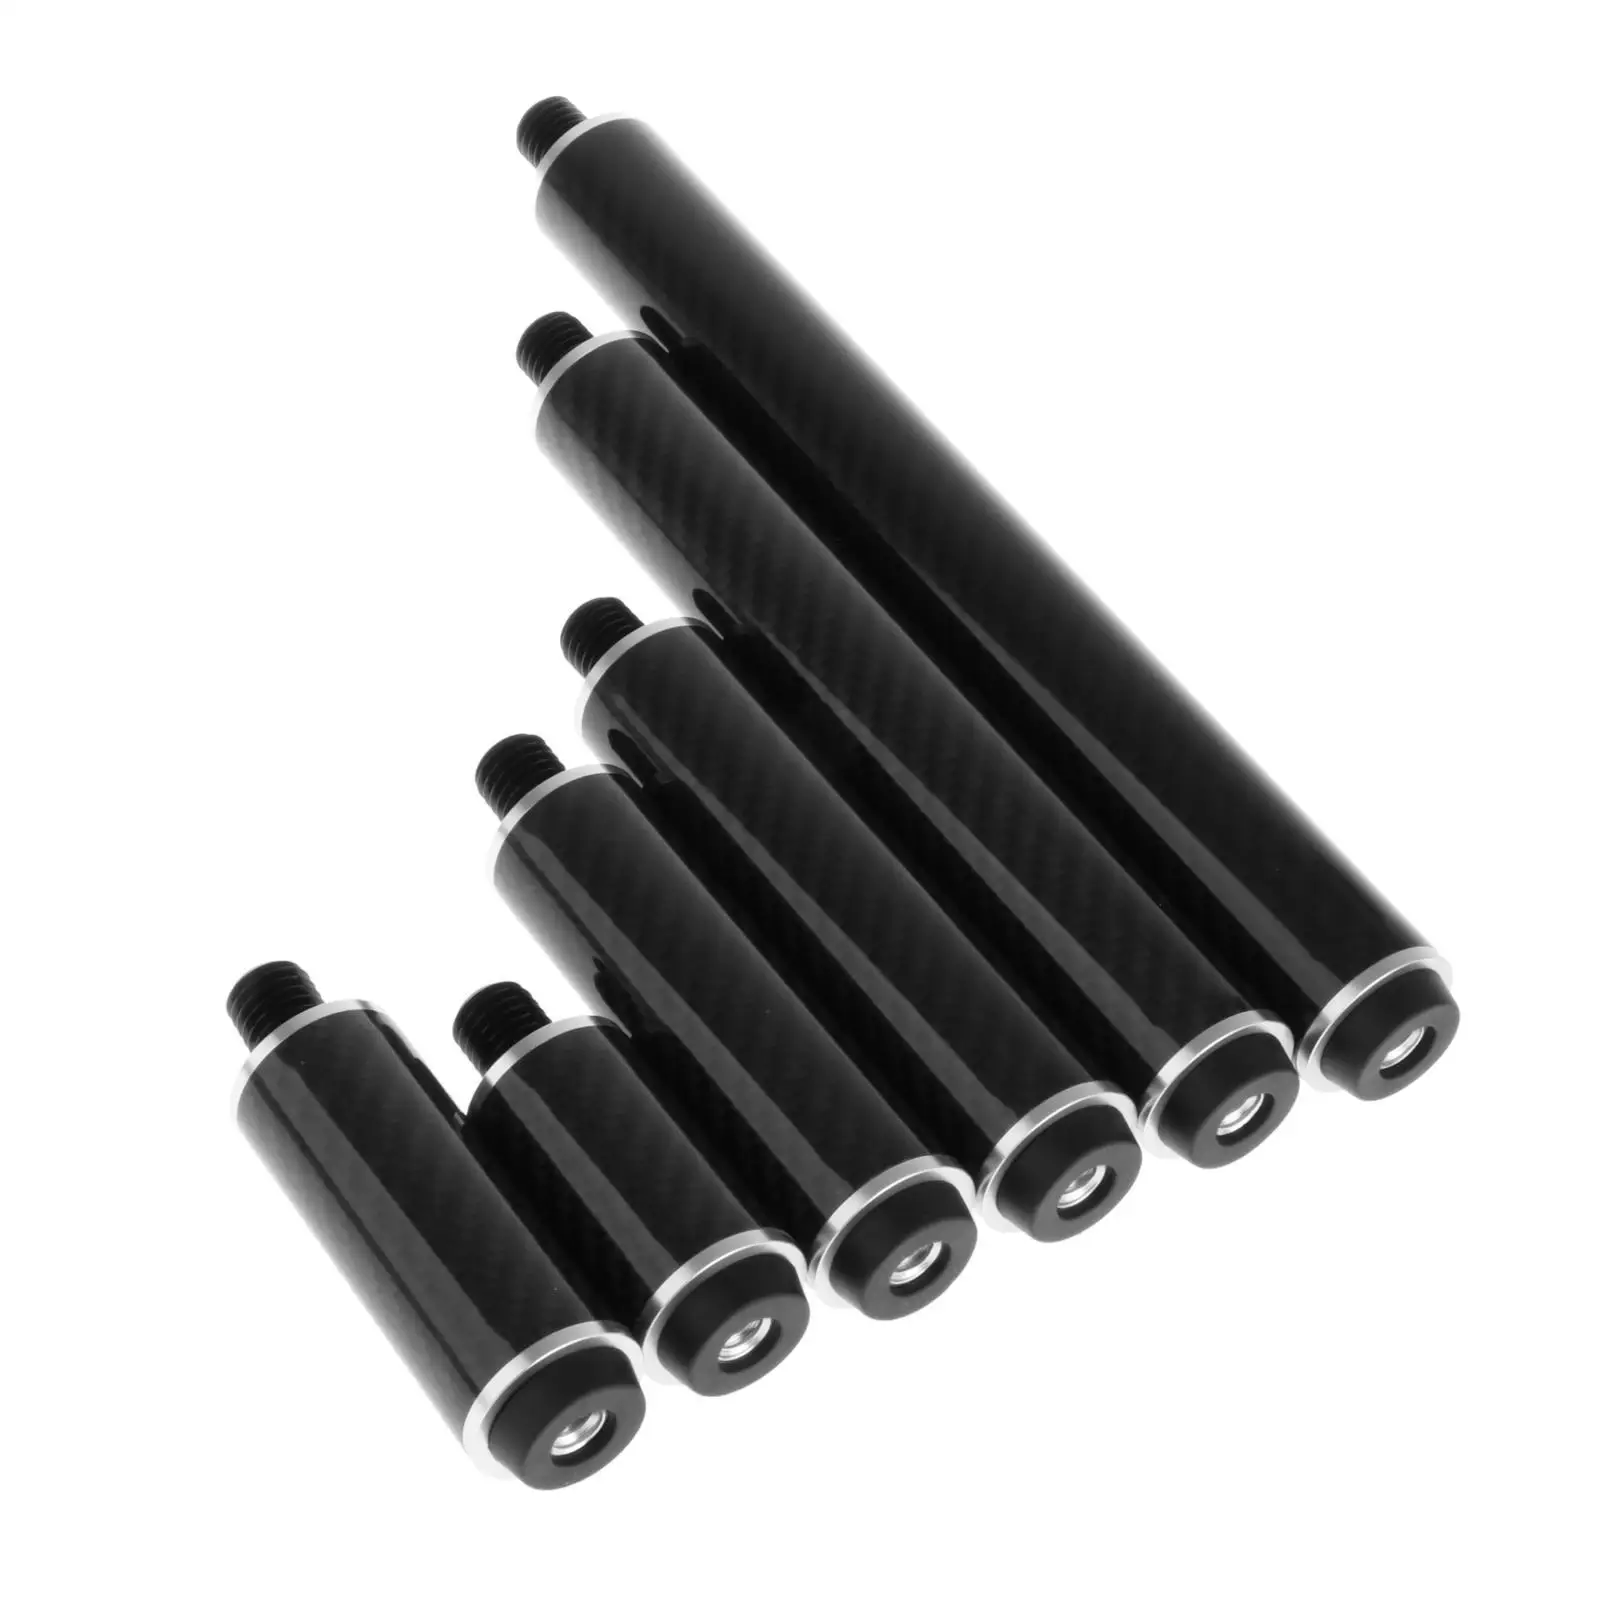 Billiards Pool Cue Extension Weights Replacement with Back Cap Carbon Fiber Cue